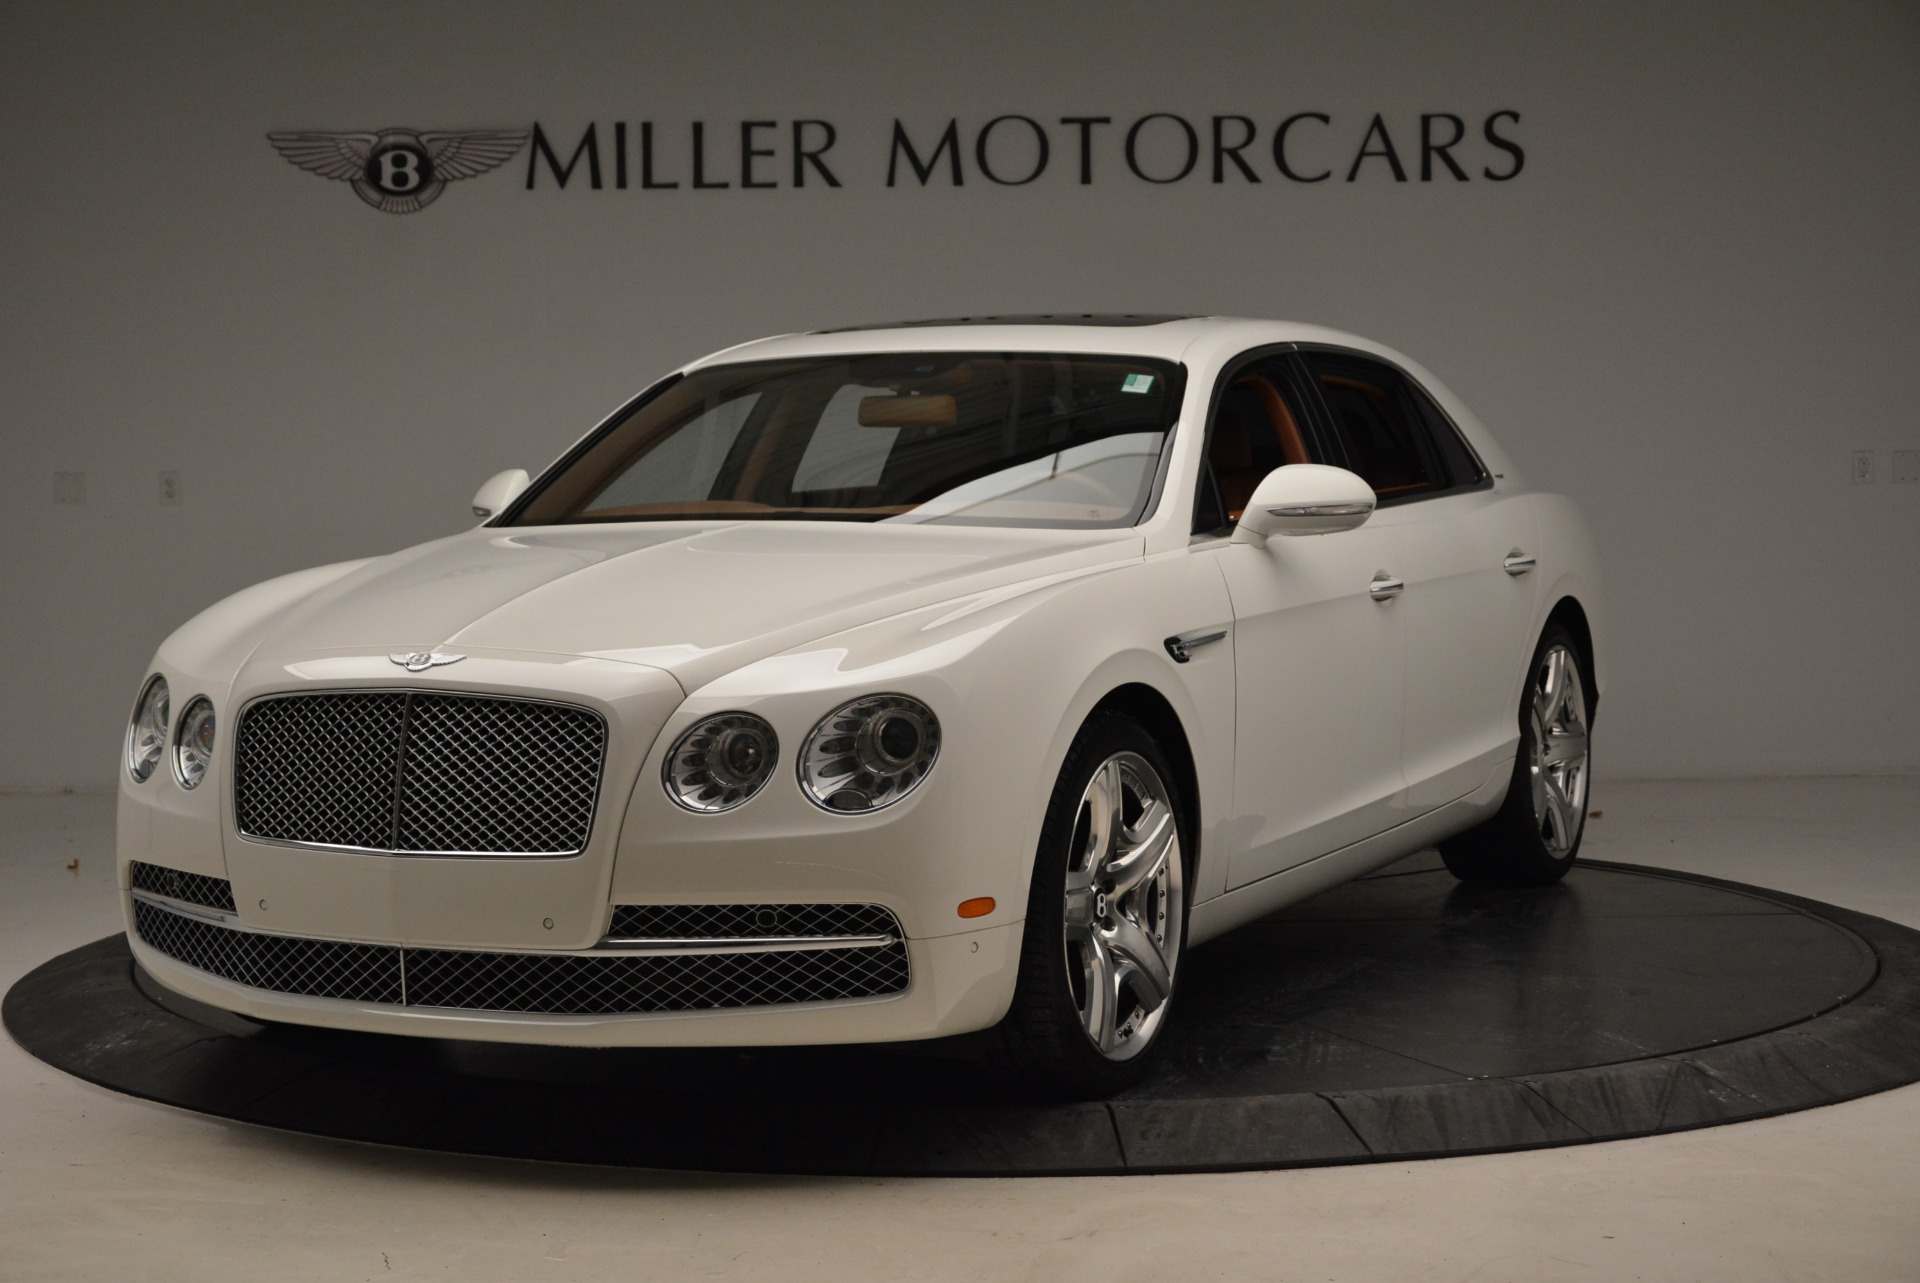 Used 2014 Bentley Flying Spur W12 for sale Sold at Bugatti of Greenwich in Greenwich CT 06830 1